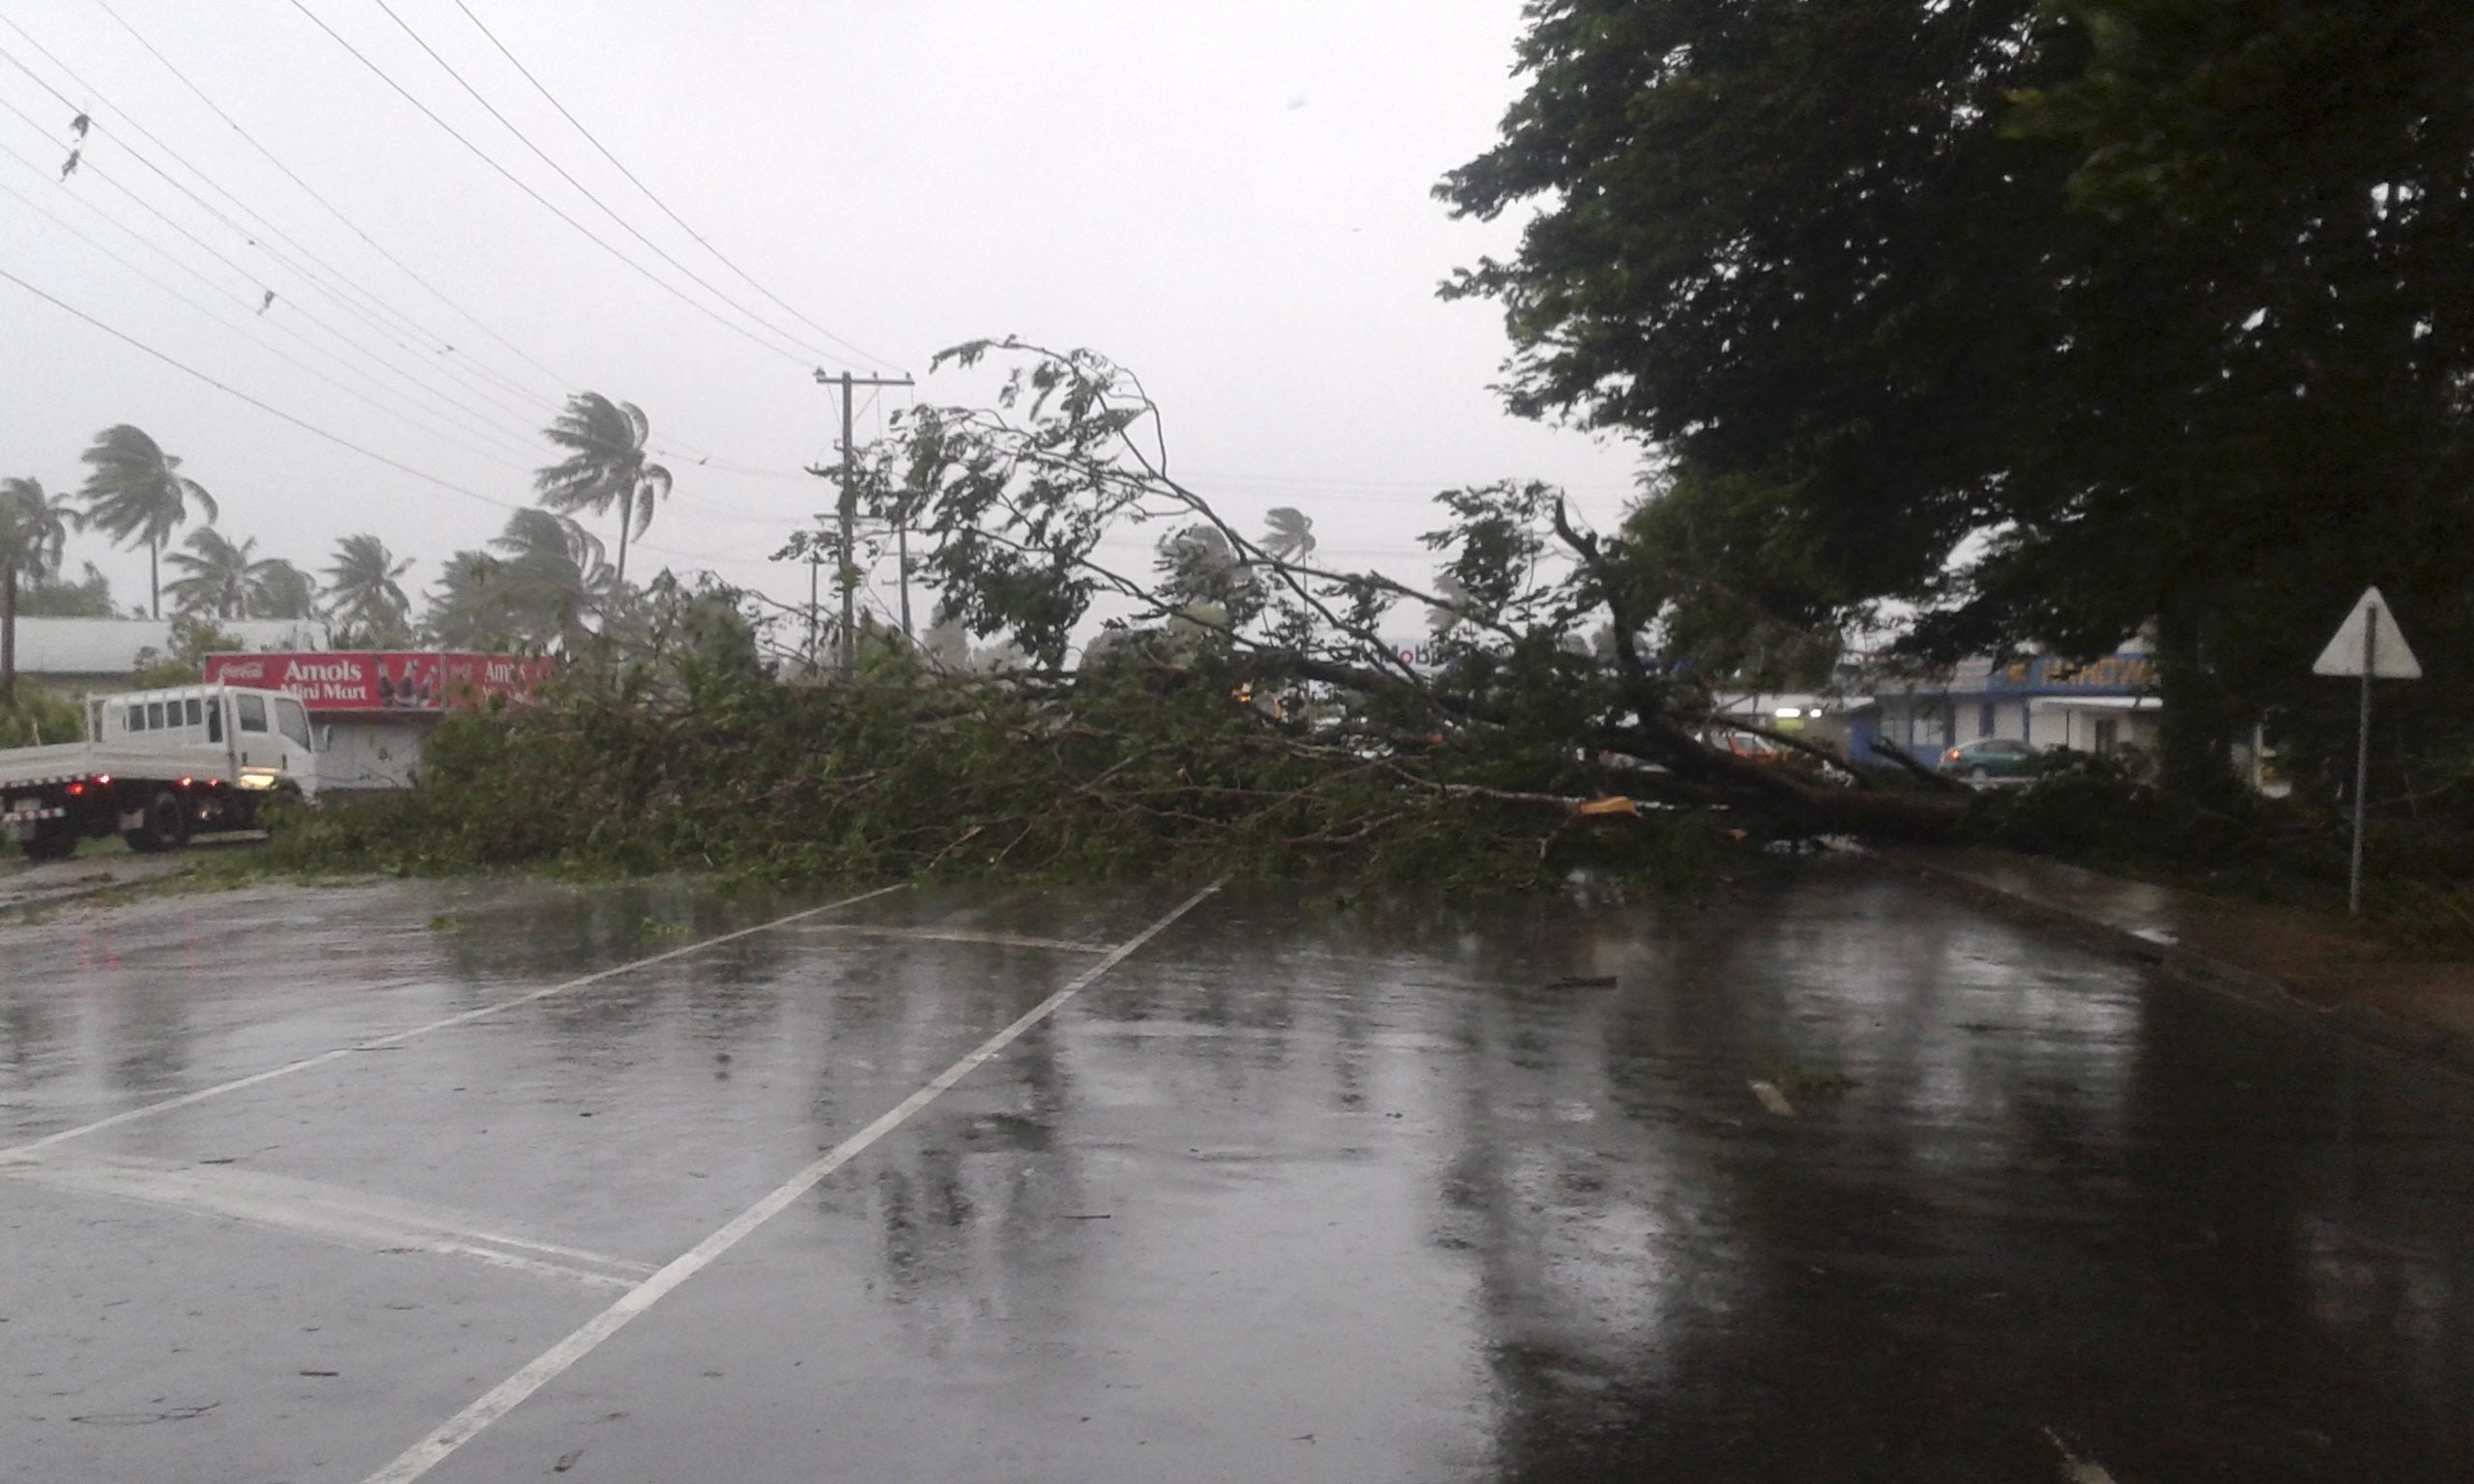 A tree blocks a road after it was blown down by the encroaching cyclone Winston in Nakasi, Fiji, Saturday, Feb. 20, 2016. The Pacific island nation of Fiji is hunkering down as a formidable cyclone with winds of 300 kilometers (186 miles) per hour approaches.